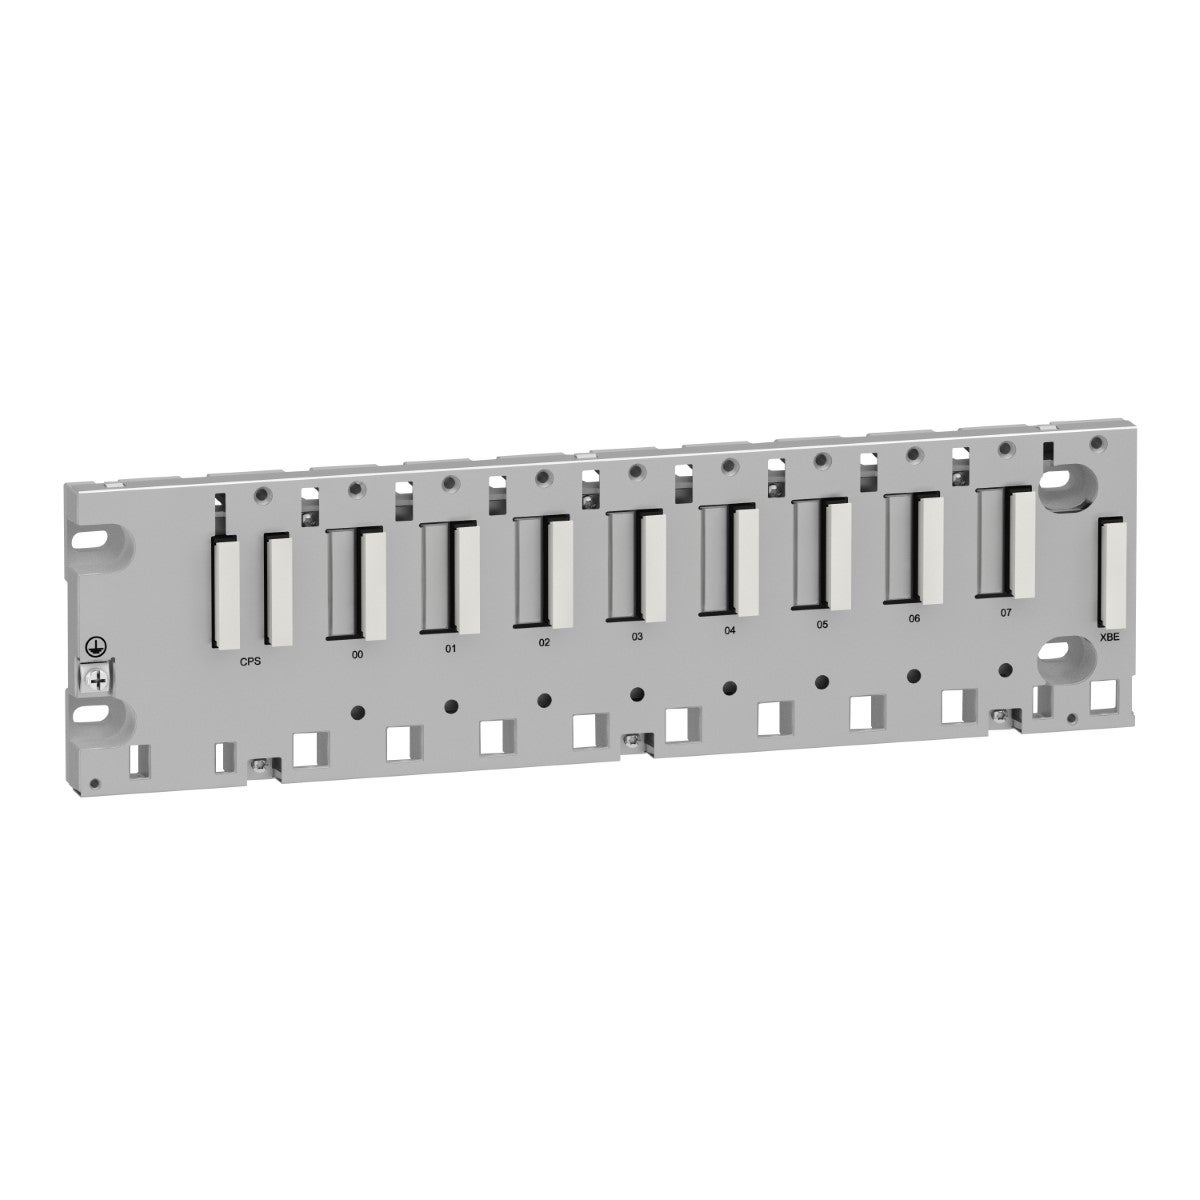 rack, Modicon M340 automation platform, 8 slots, panel, plate or DIN rail mounting